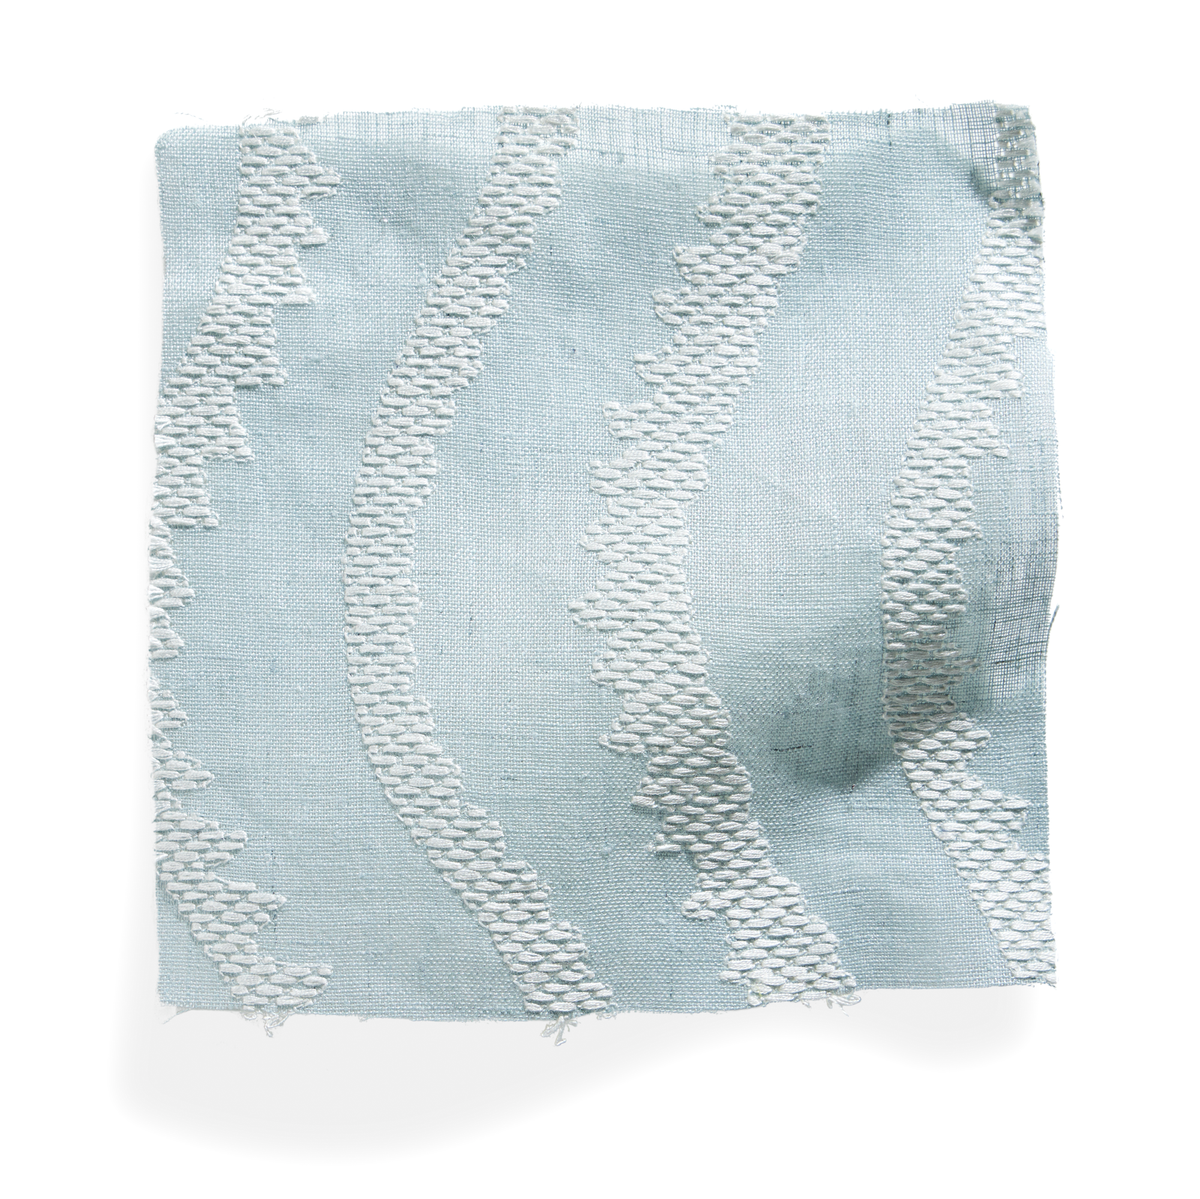 Notched Vines Fabric in Light Blue